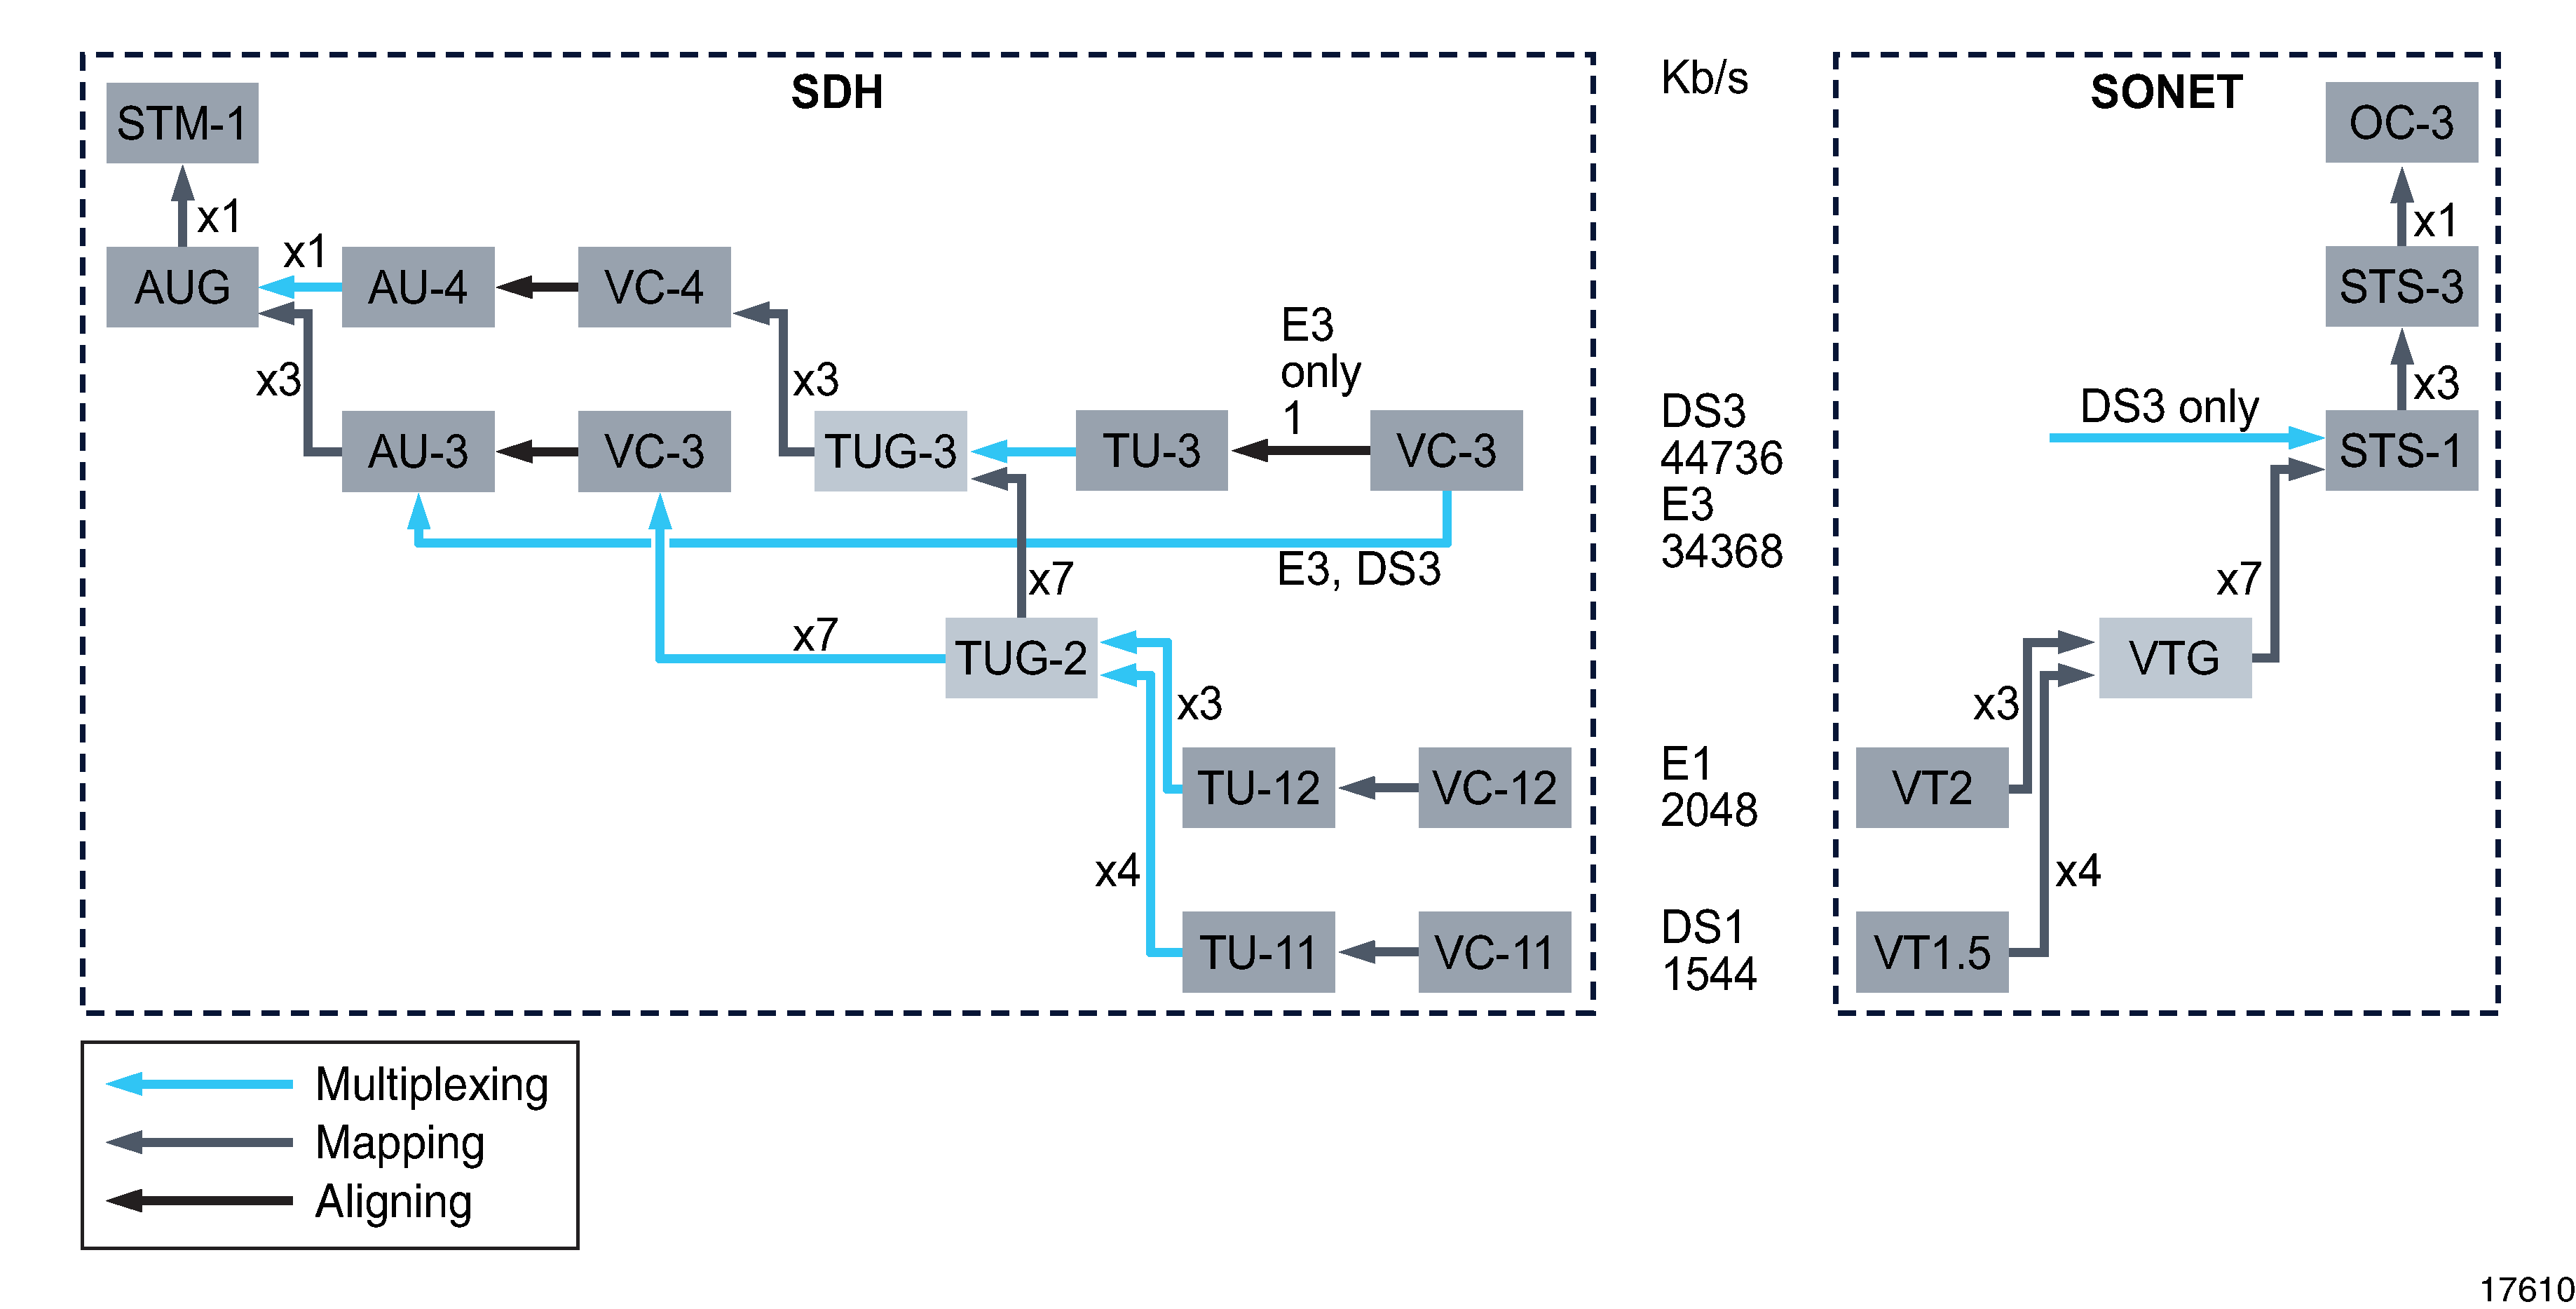 Supported SONET/SDH multiplexing structures